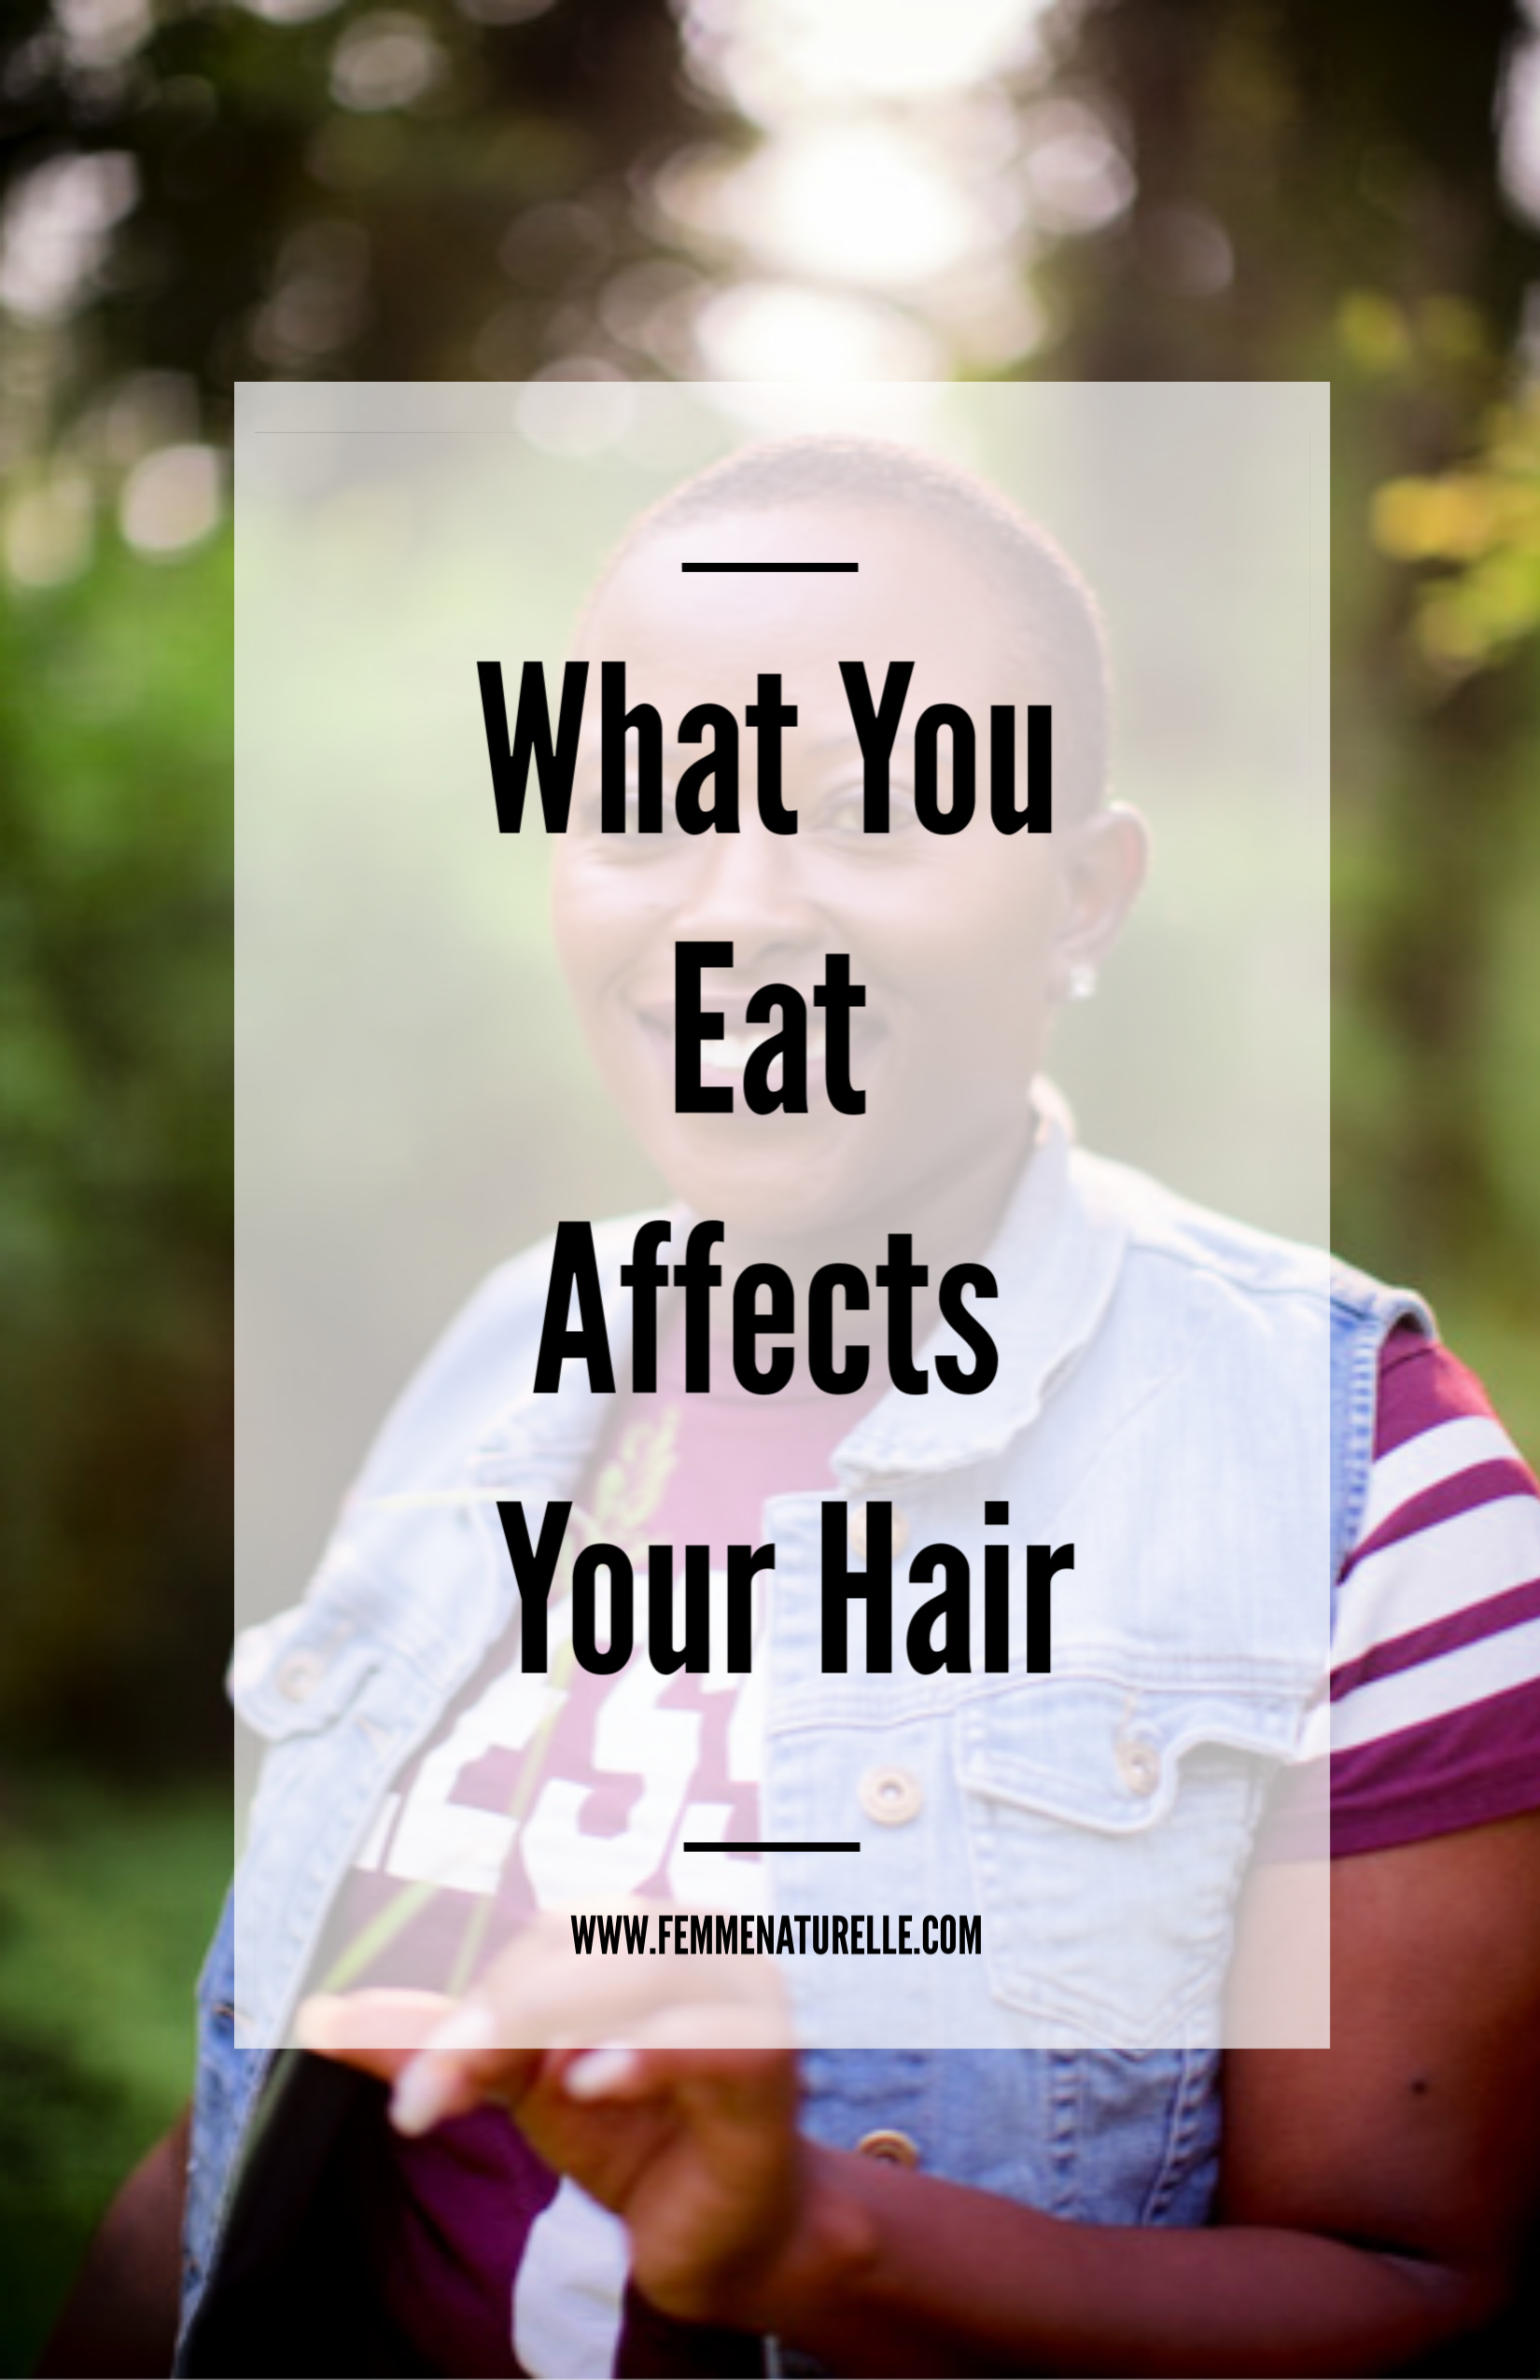 What You Eat Affects Your Hair